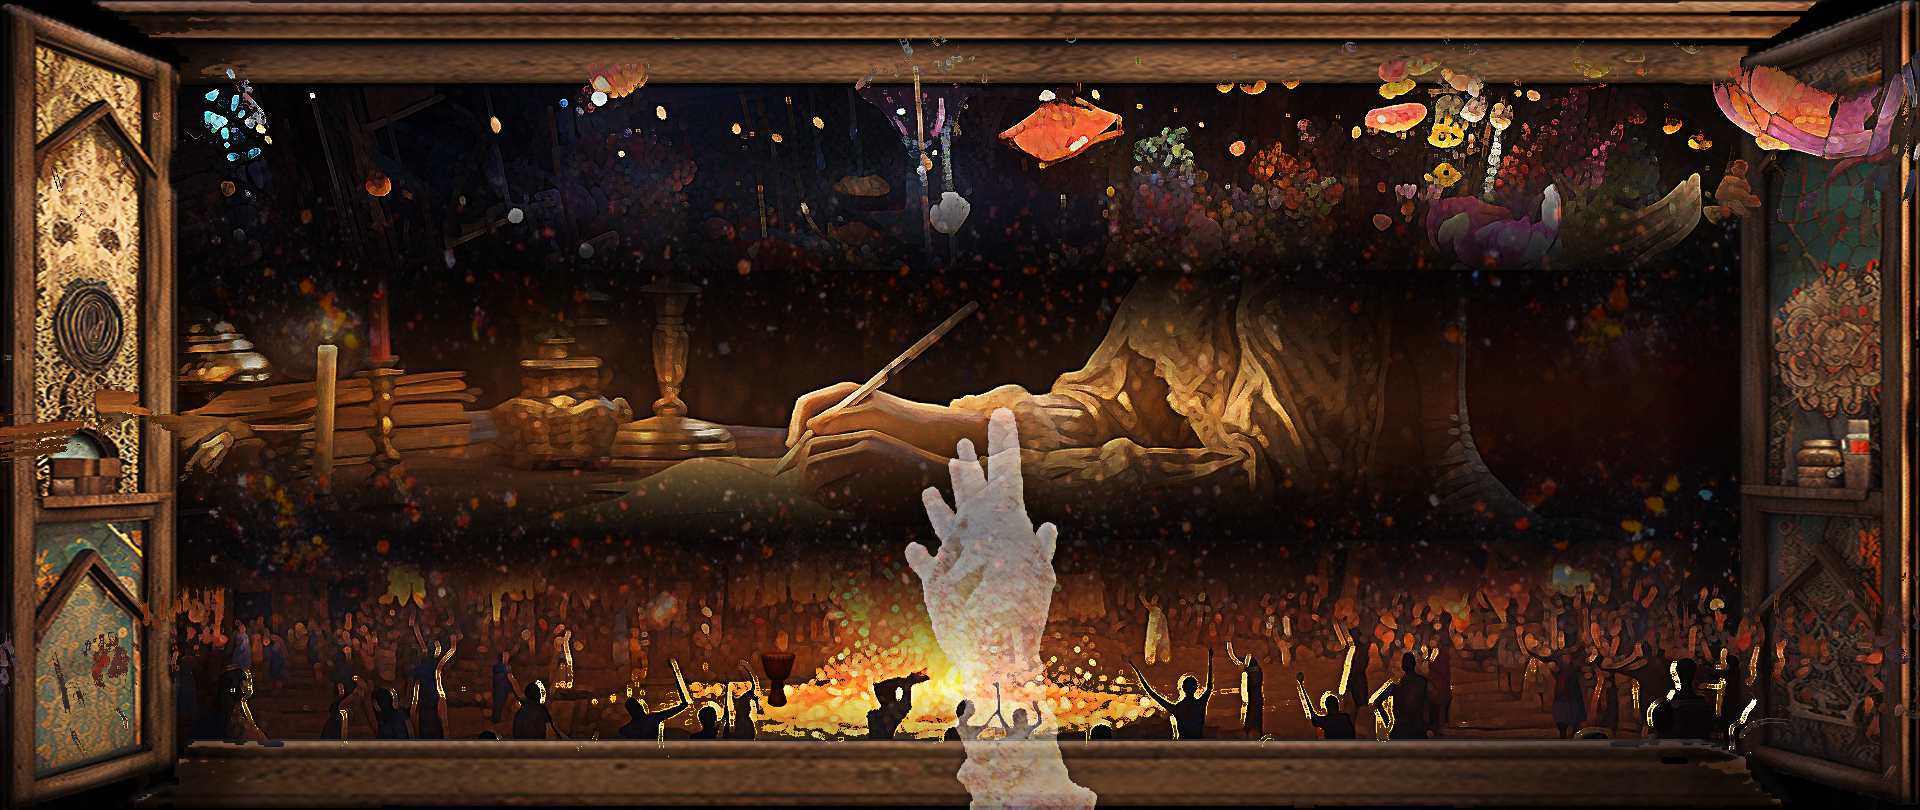 An AI-generated hand reaches for an open cabinet that shows a mix of the project's three main scenes: 1. the World of Manwha; 2. the Quill Writing scene; and 3. the djembe celebration scene